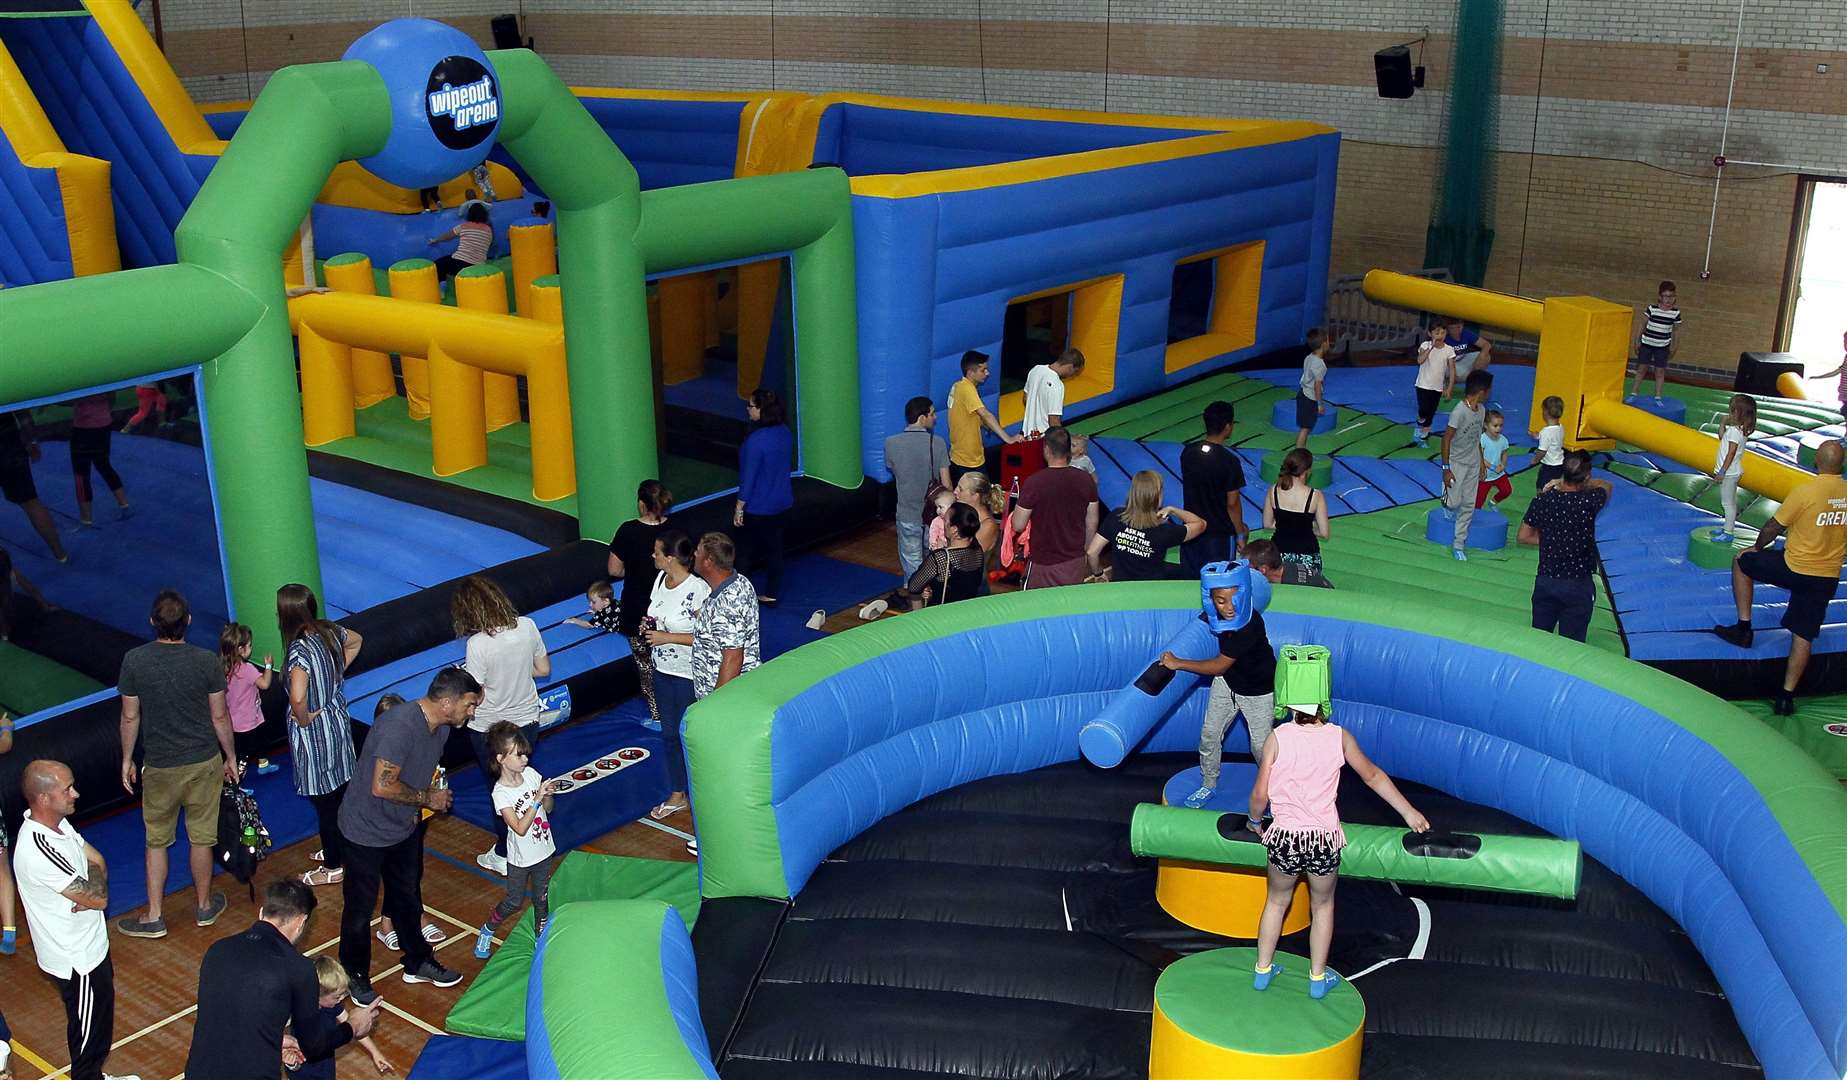 Wipeout Arena at a previous event in Sittingbourne